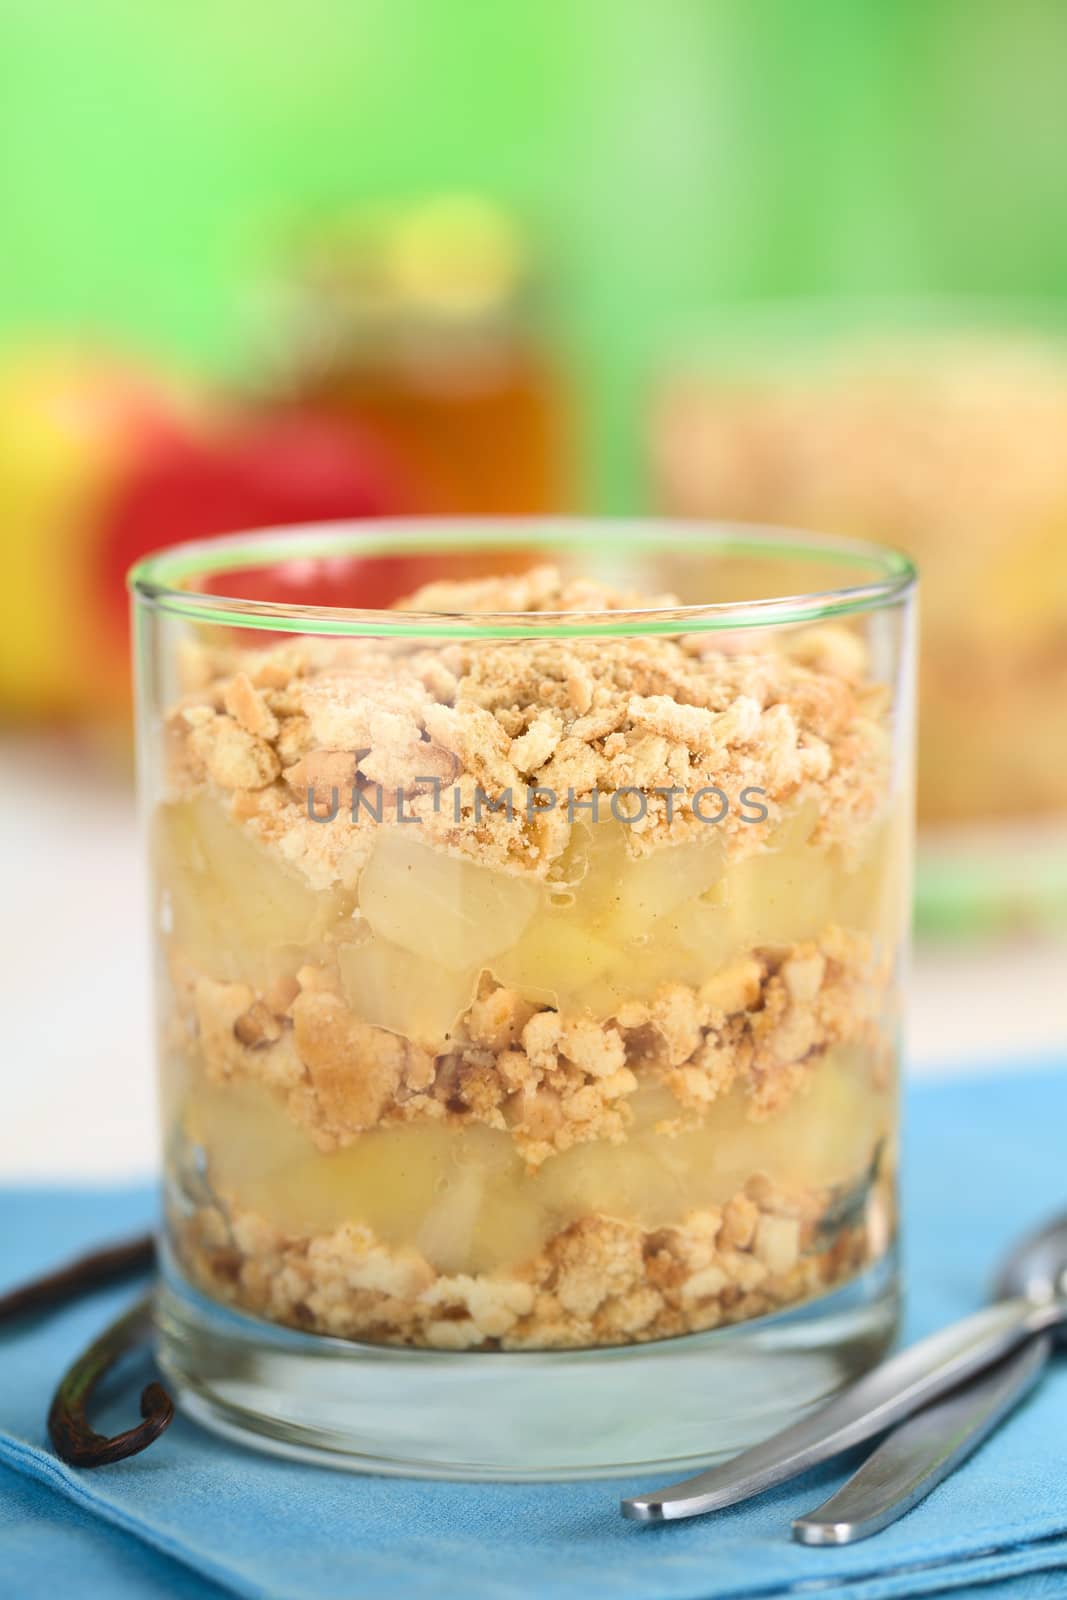 Simple no-bake Danish apple cake called Aeblekage made of stewed apple and vanilla cookie crumbs served in glass with spoon and vanilla on the side (Selective Focus, Focus on the front of the two upper layers)